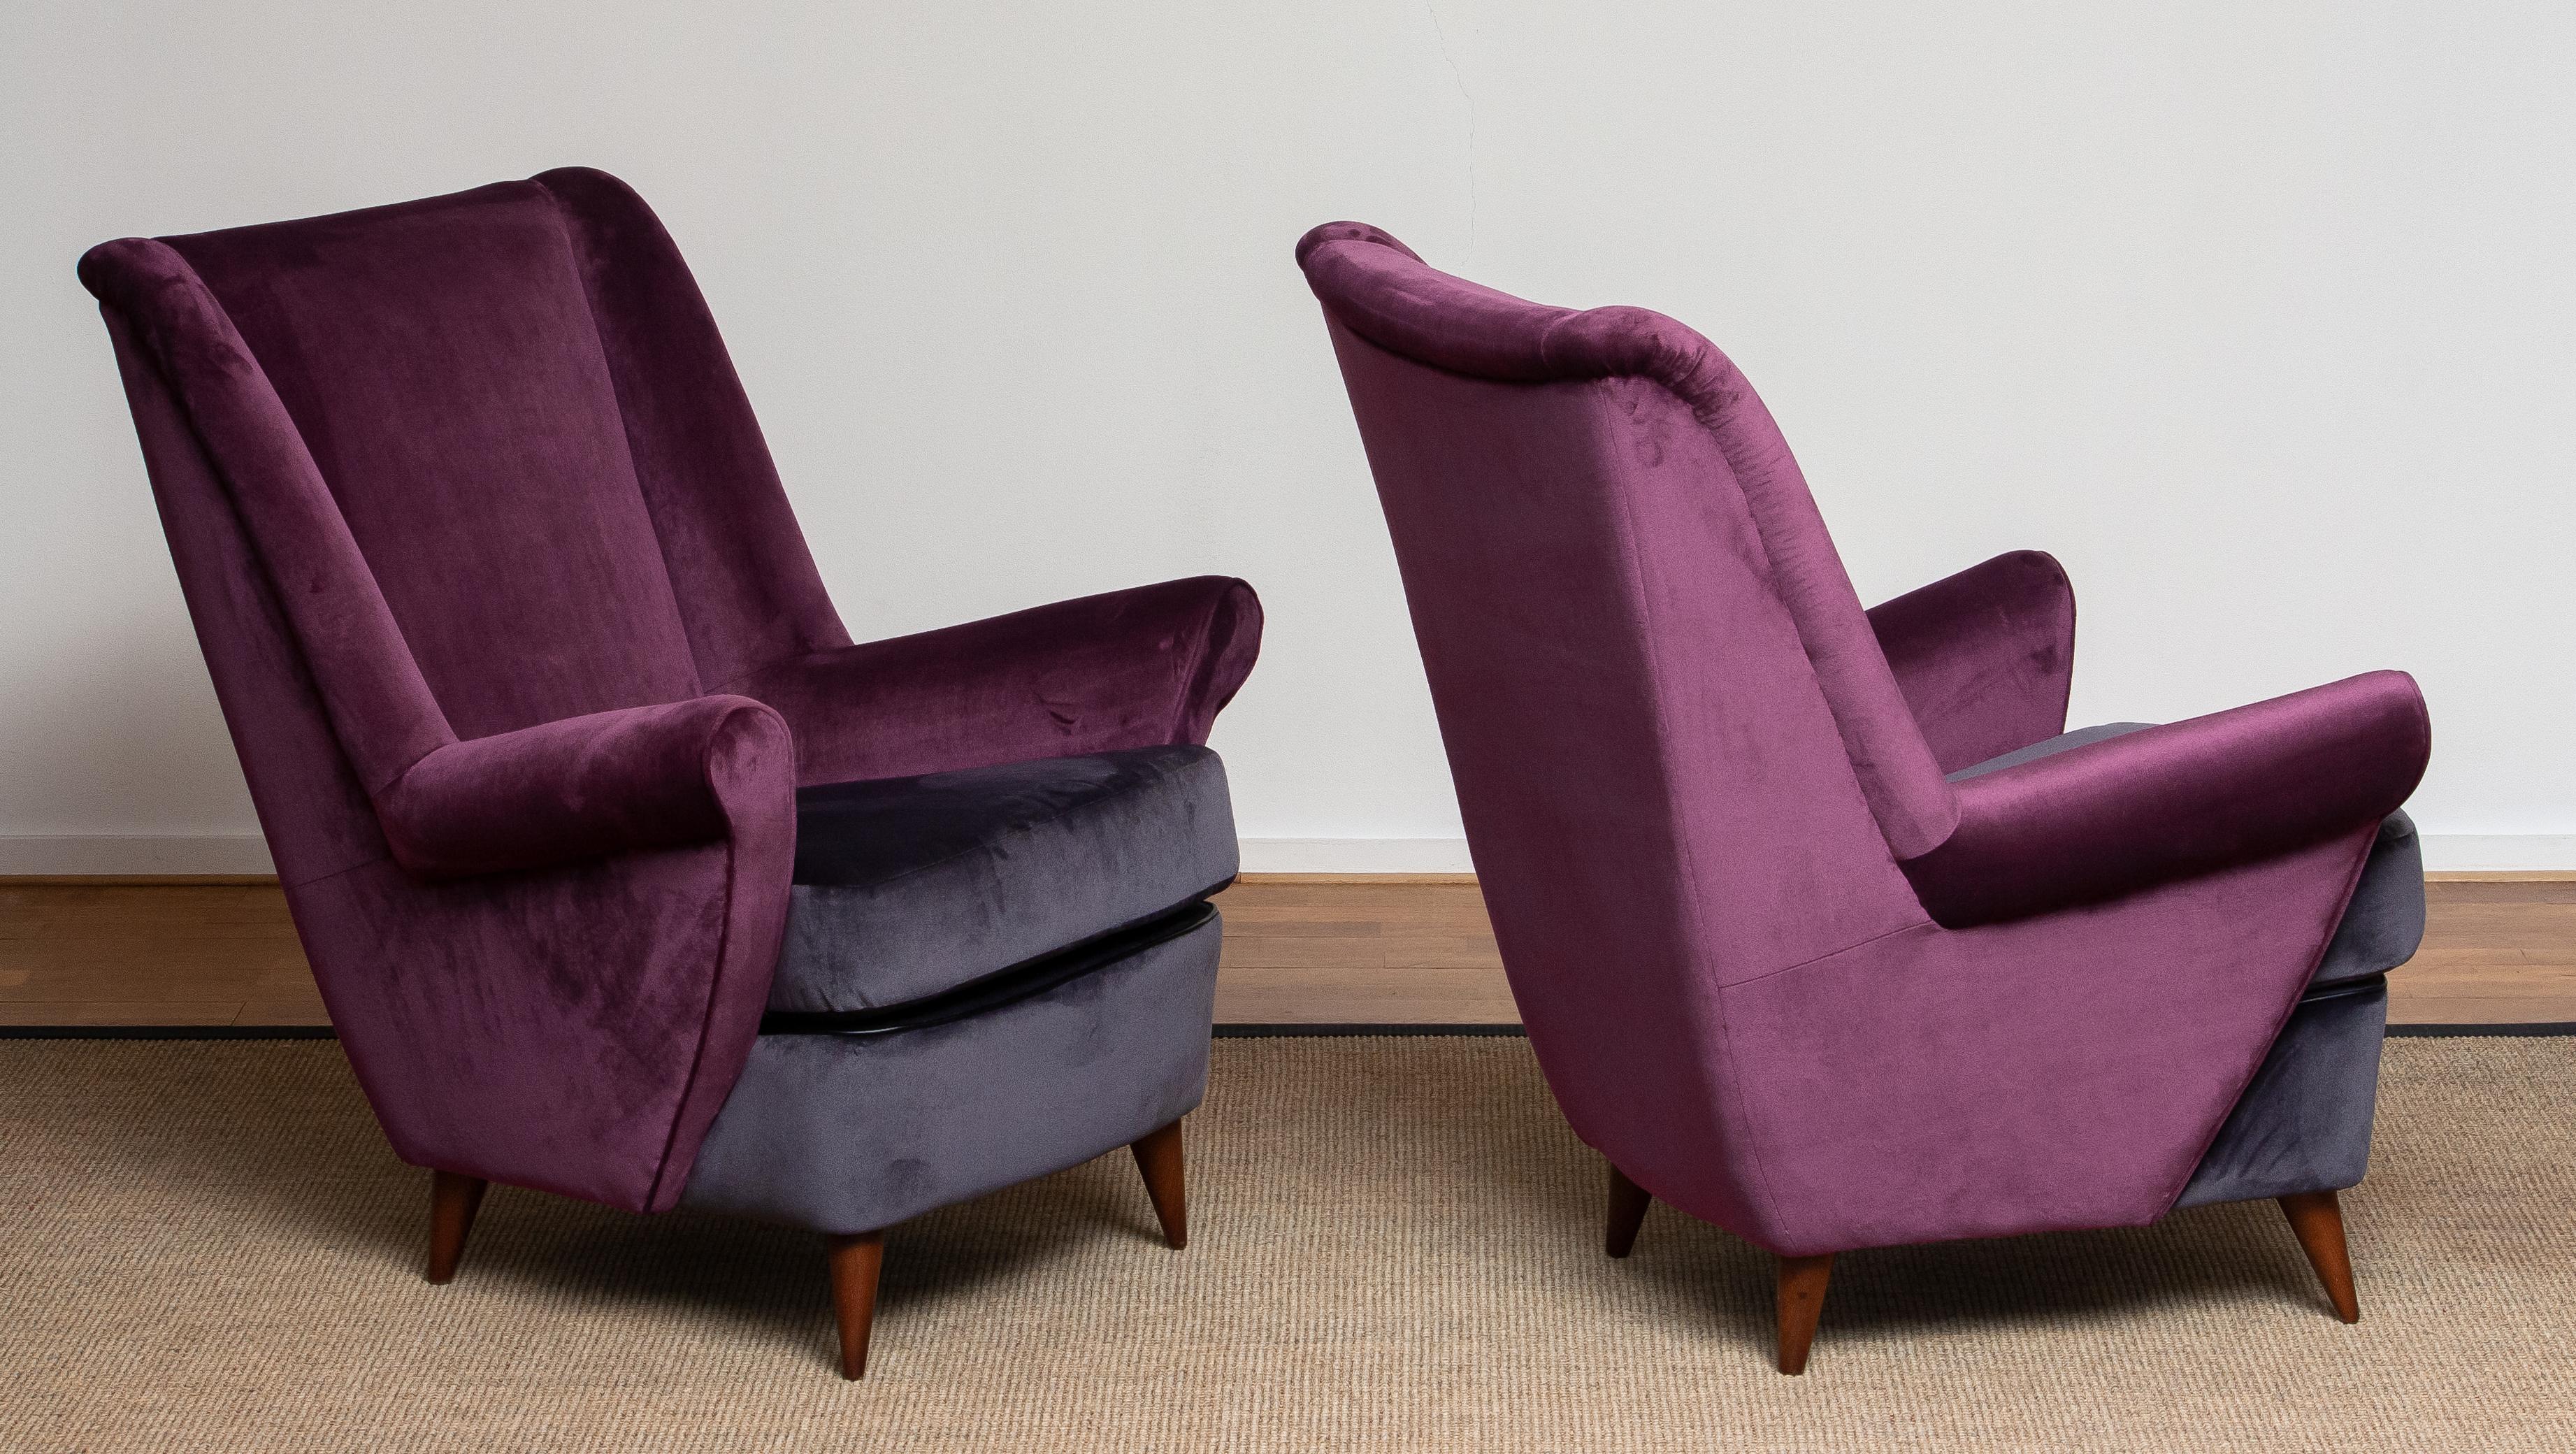 1950s Pair of Lounge / Easy Chairs Designed Gio Ponti Made by ISA Bergamo, Italy 2